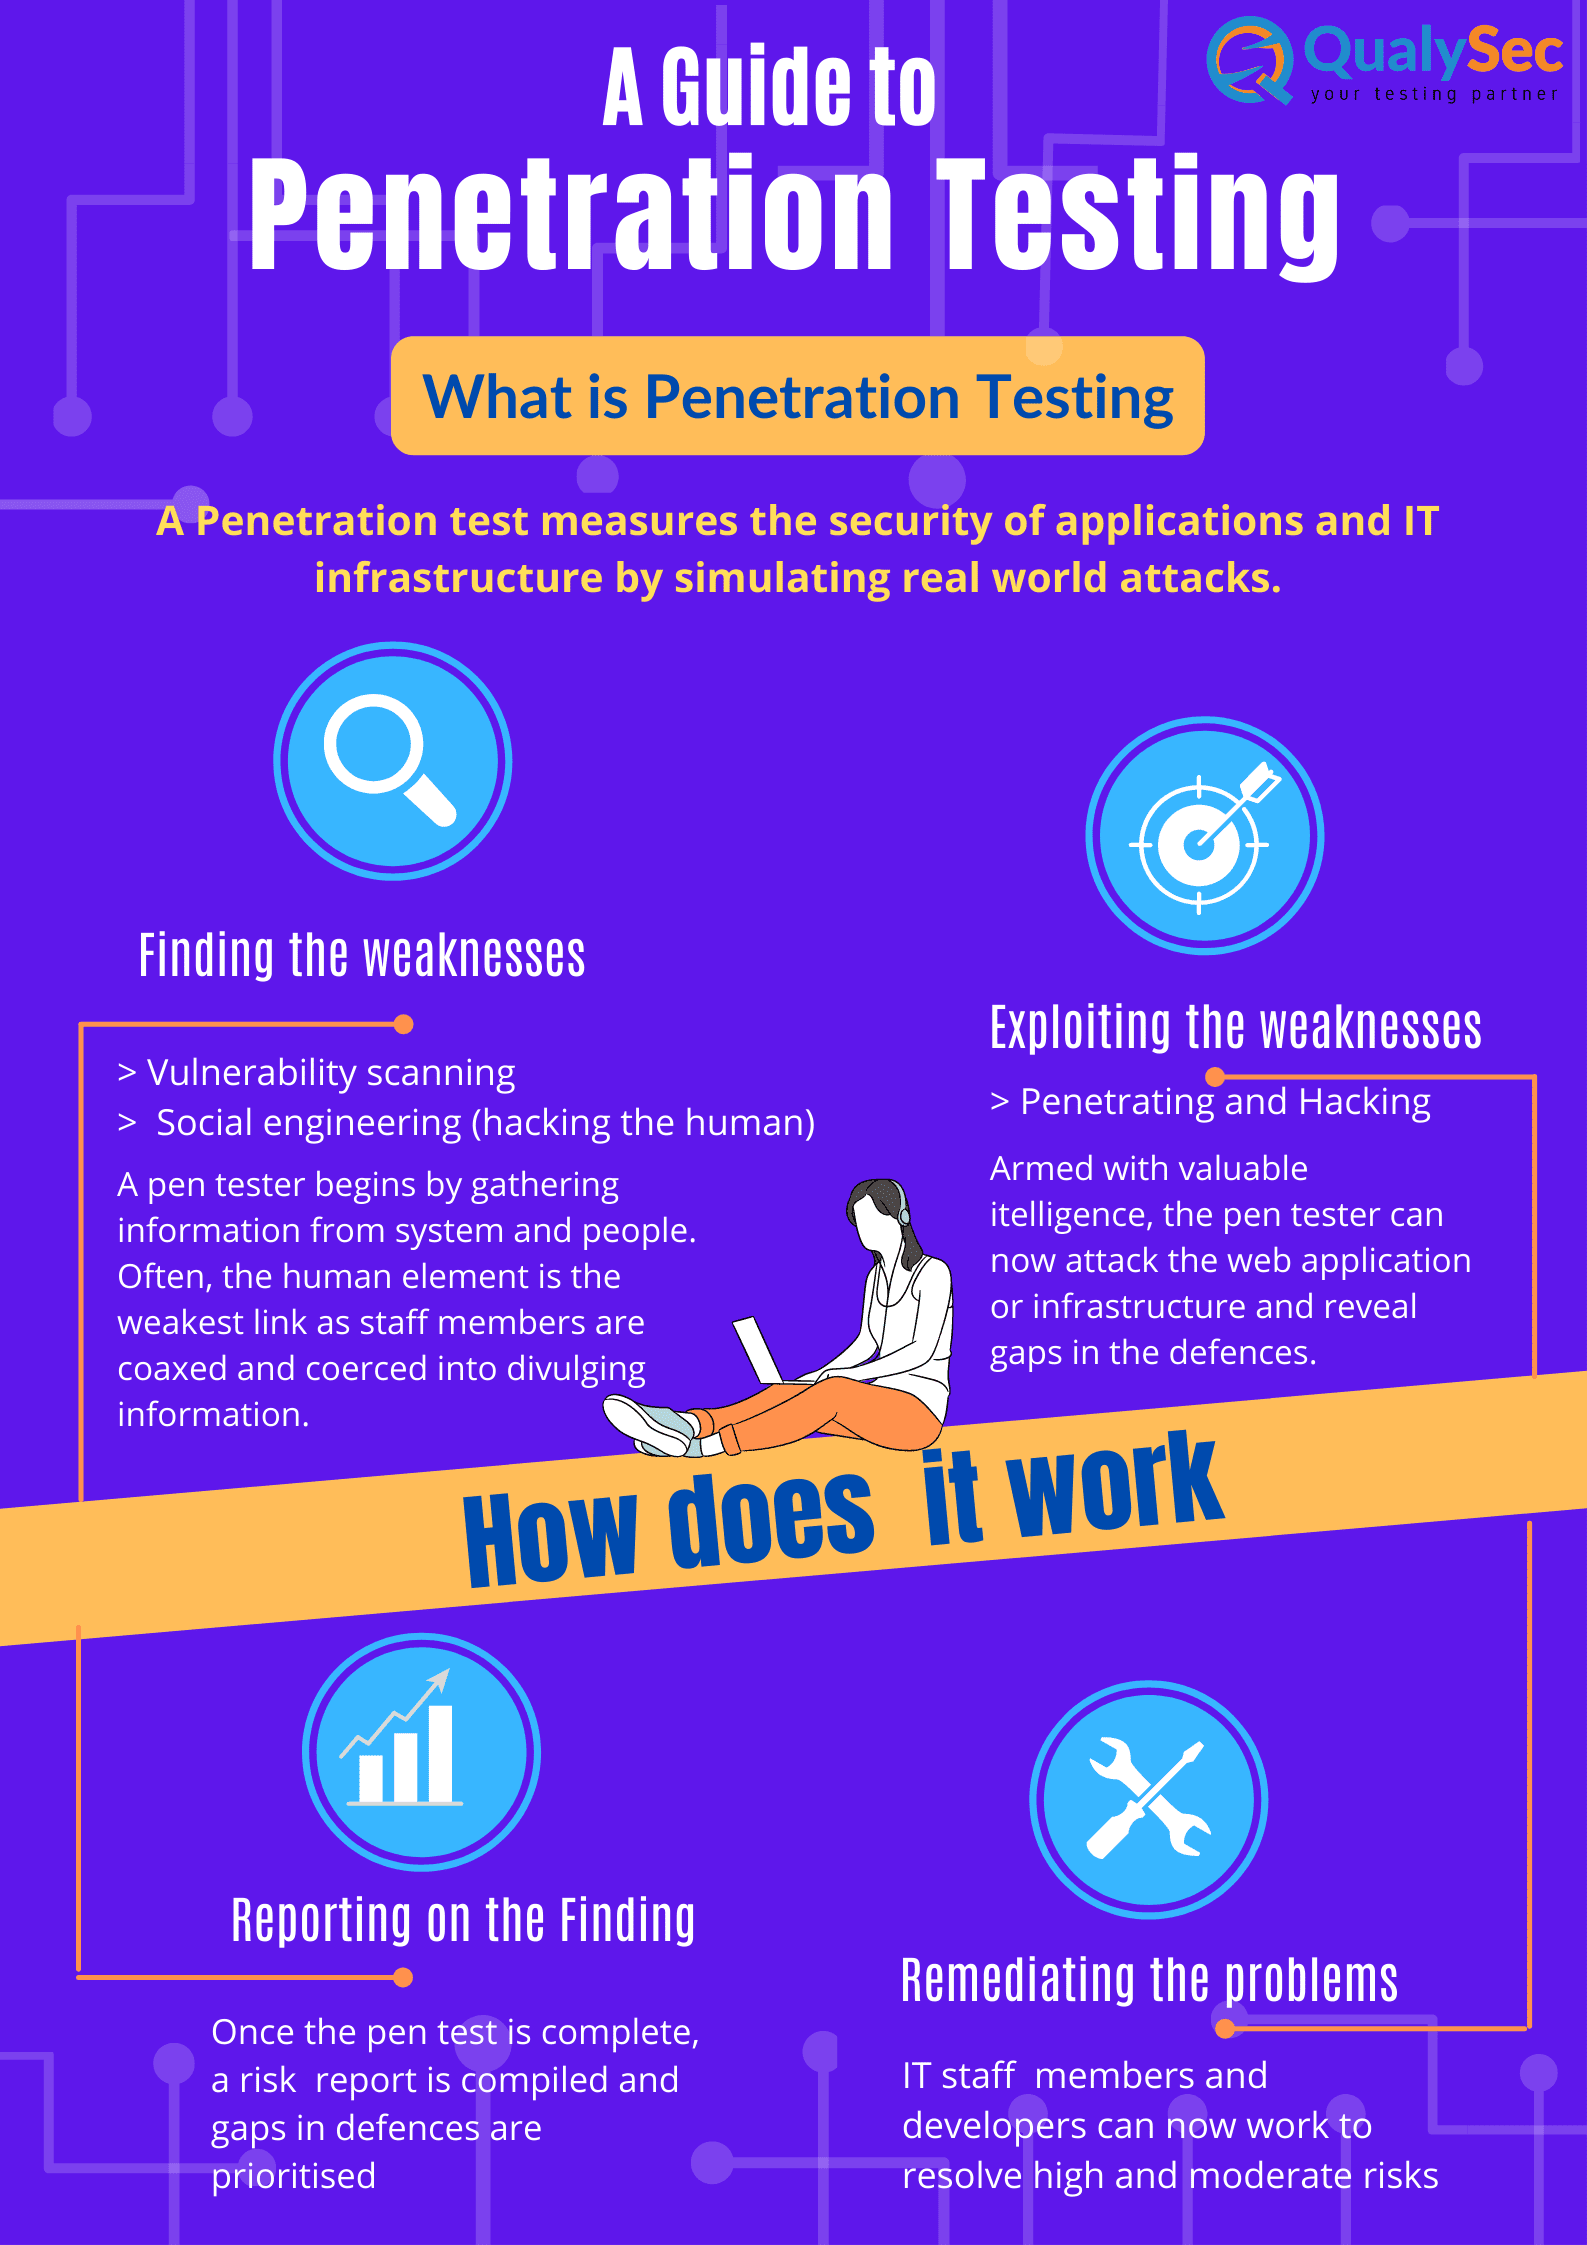 A Guide to Penetration Testing